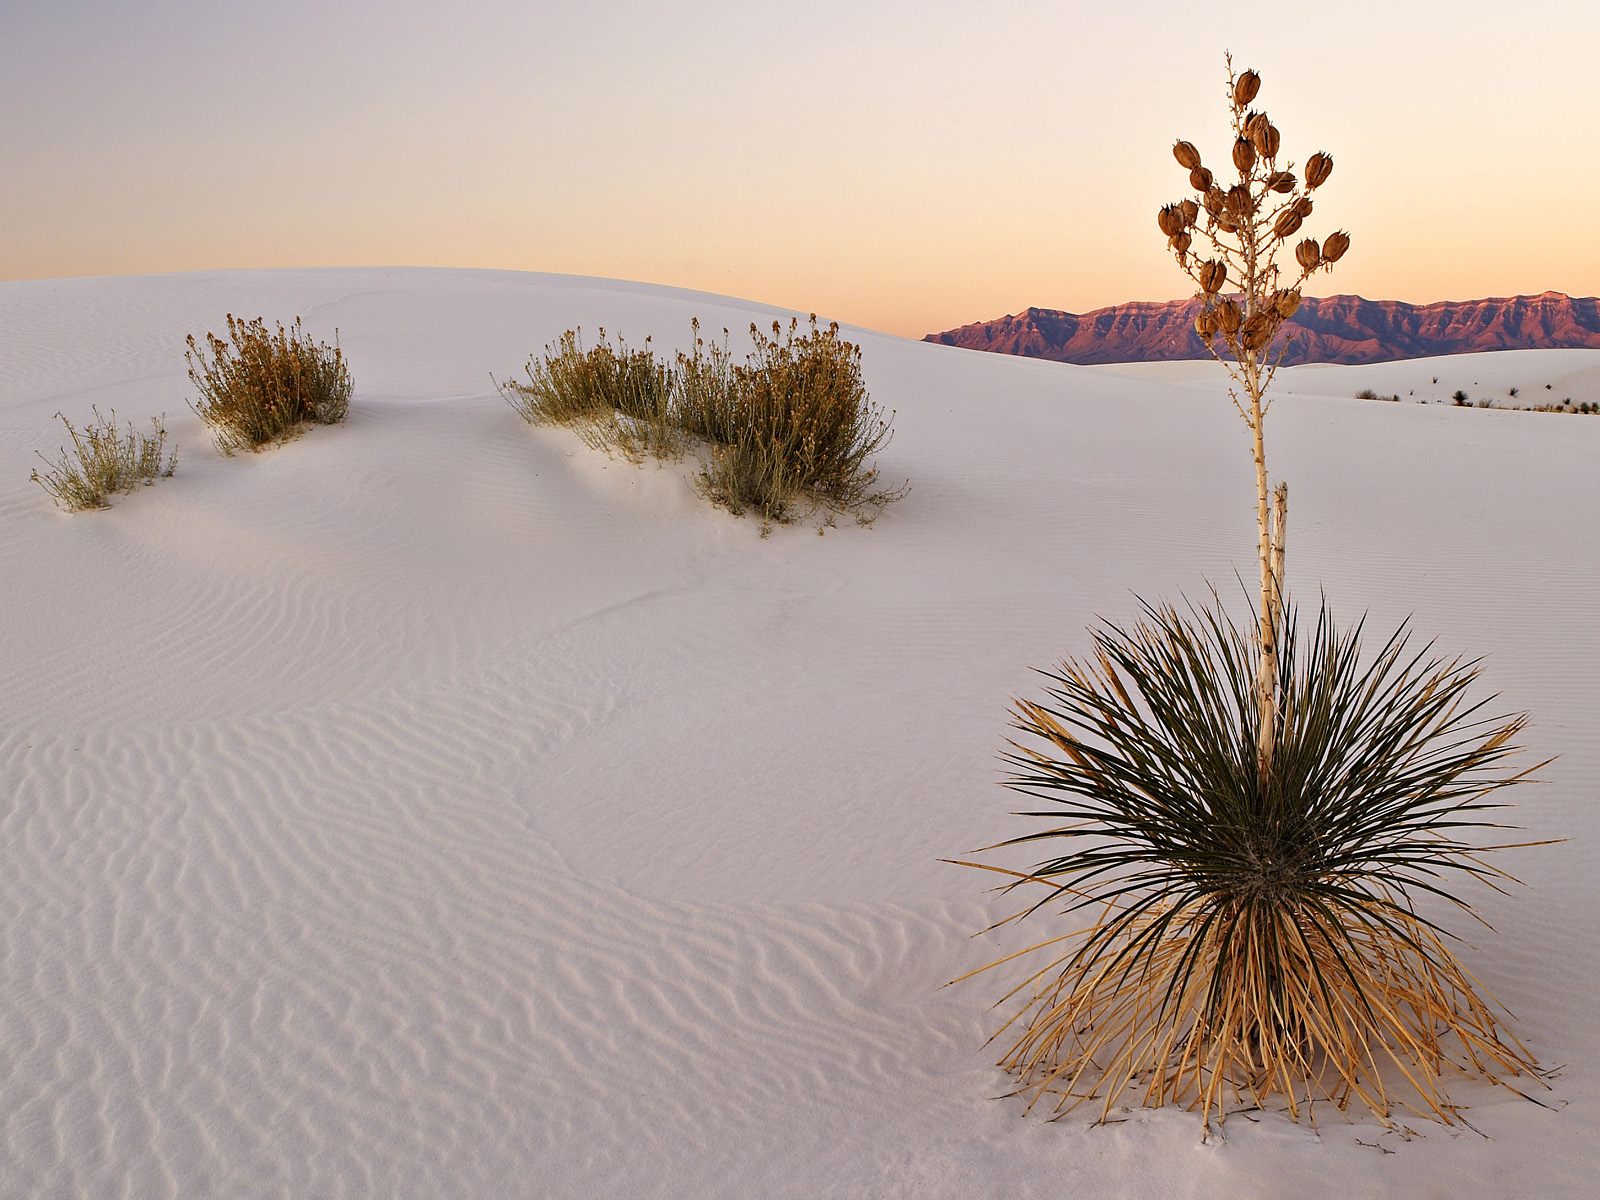 Download HQ White Sands at Sunrise, New Mexico Deserts wallpaper / 1600x1200